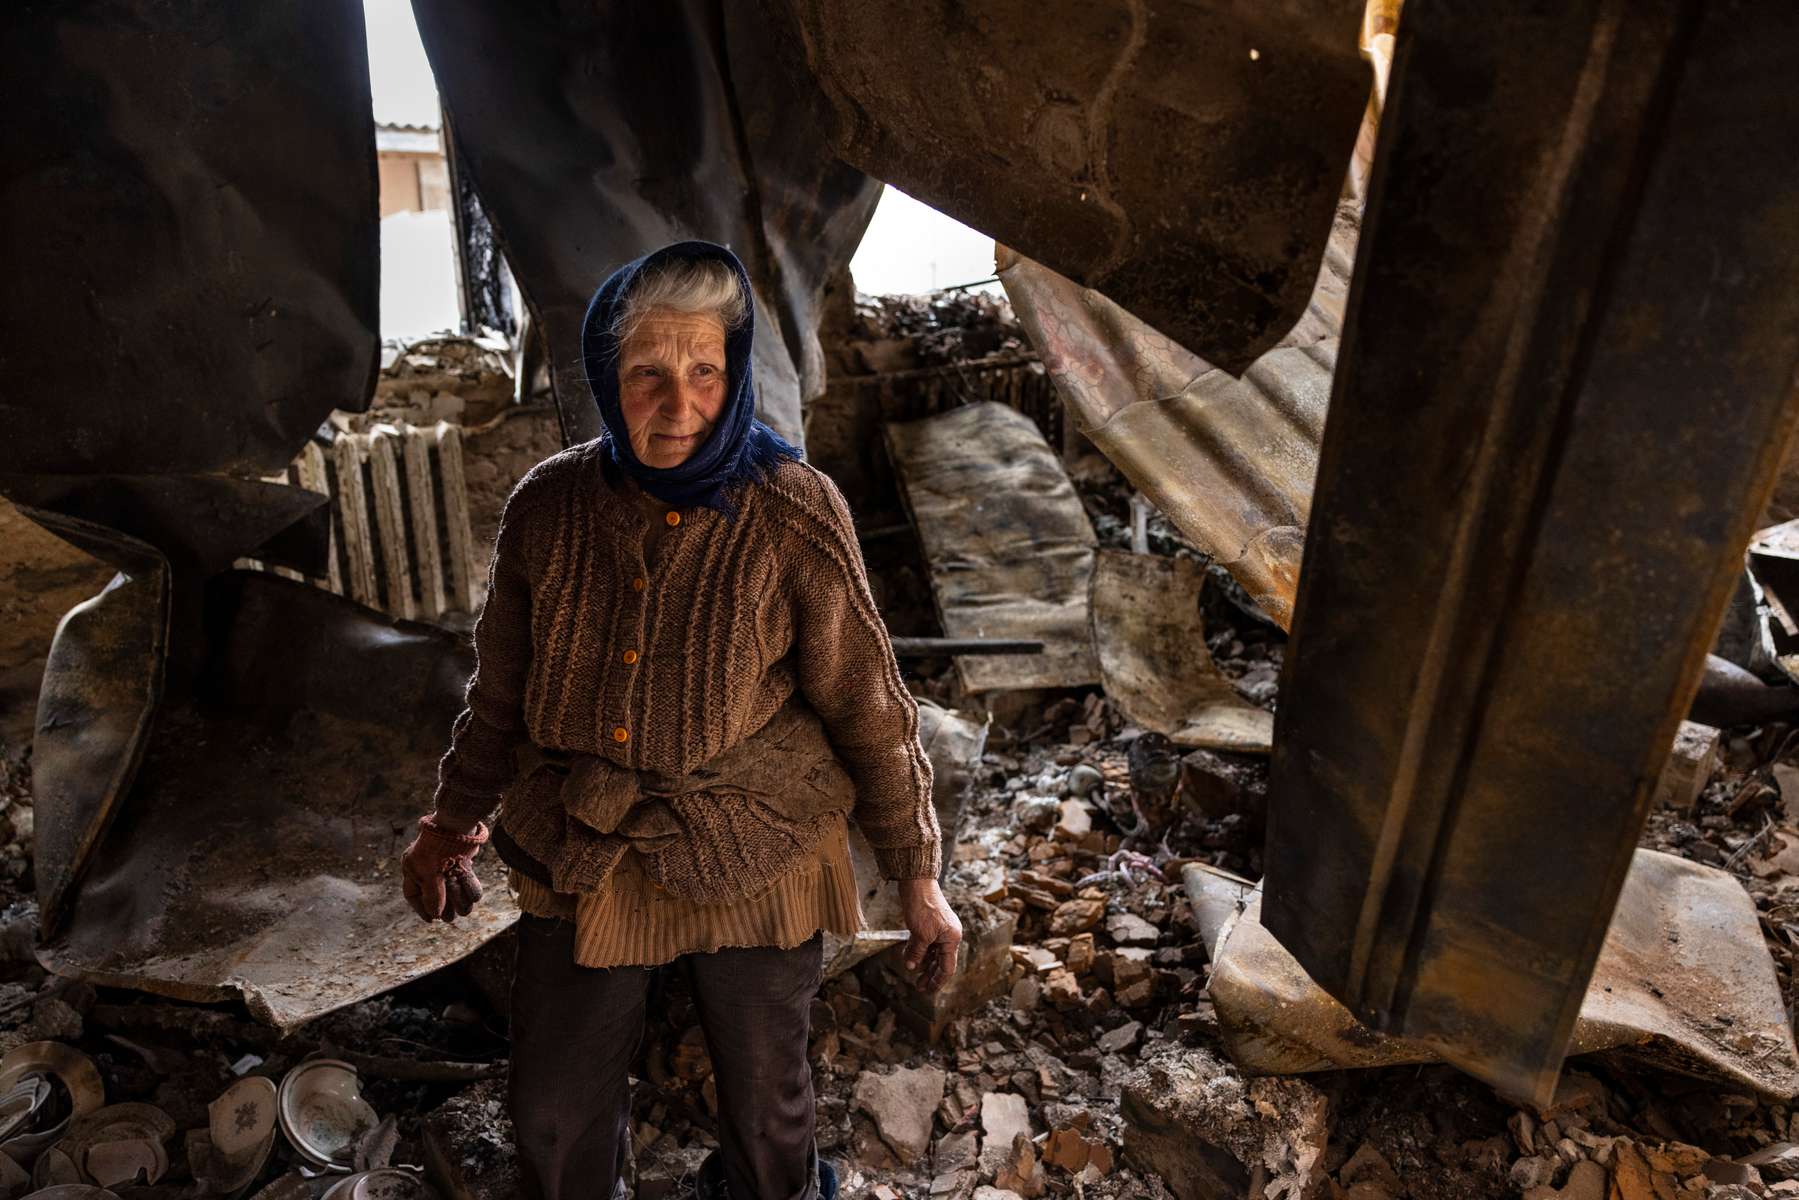 CHERNIHIV: Galina Selivon, 77, stands in her destroyed home on April 16, 2022 her home for 50 years. She lives by herself, her husband and also her son died, only her grandson is alive in Kyiv. She survived the bombing in the basement used for potato storage. 